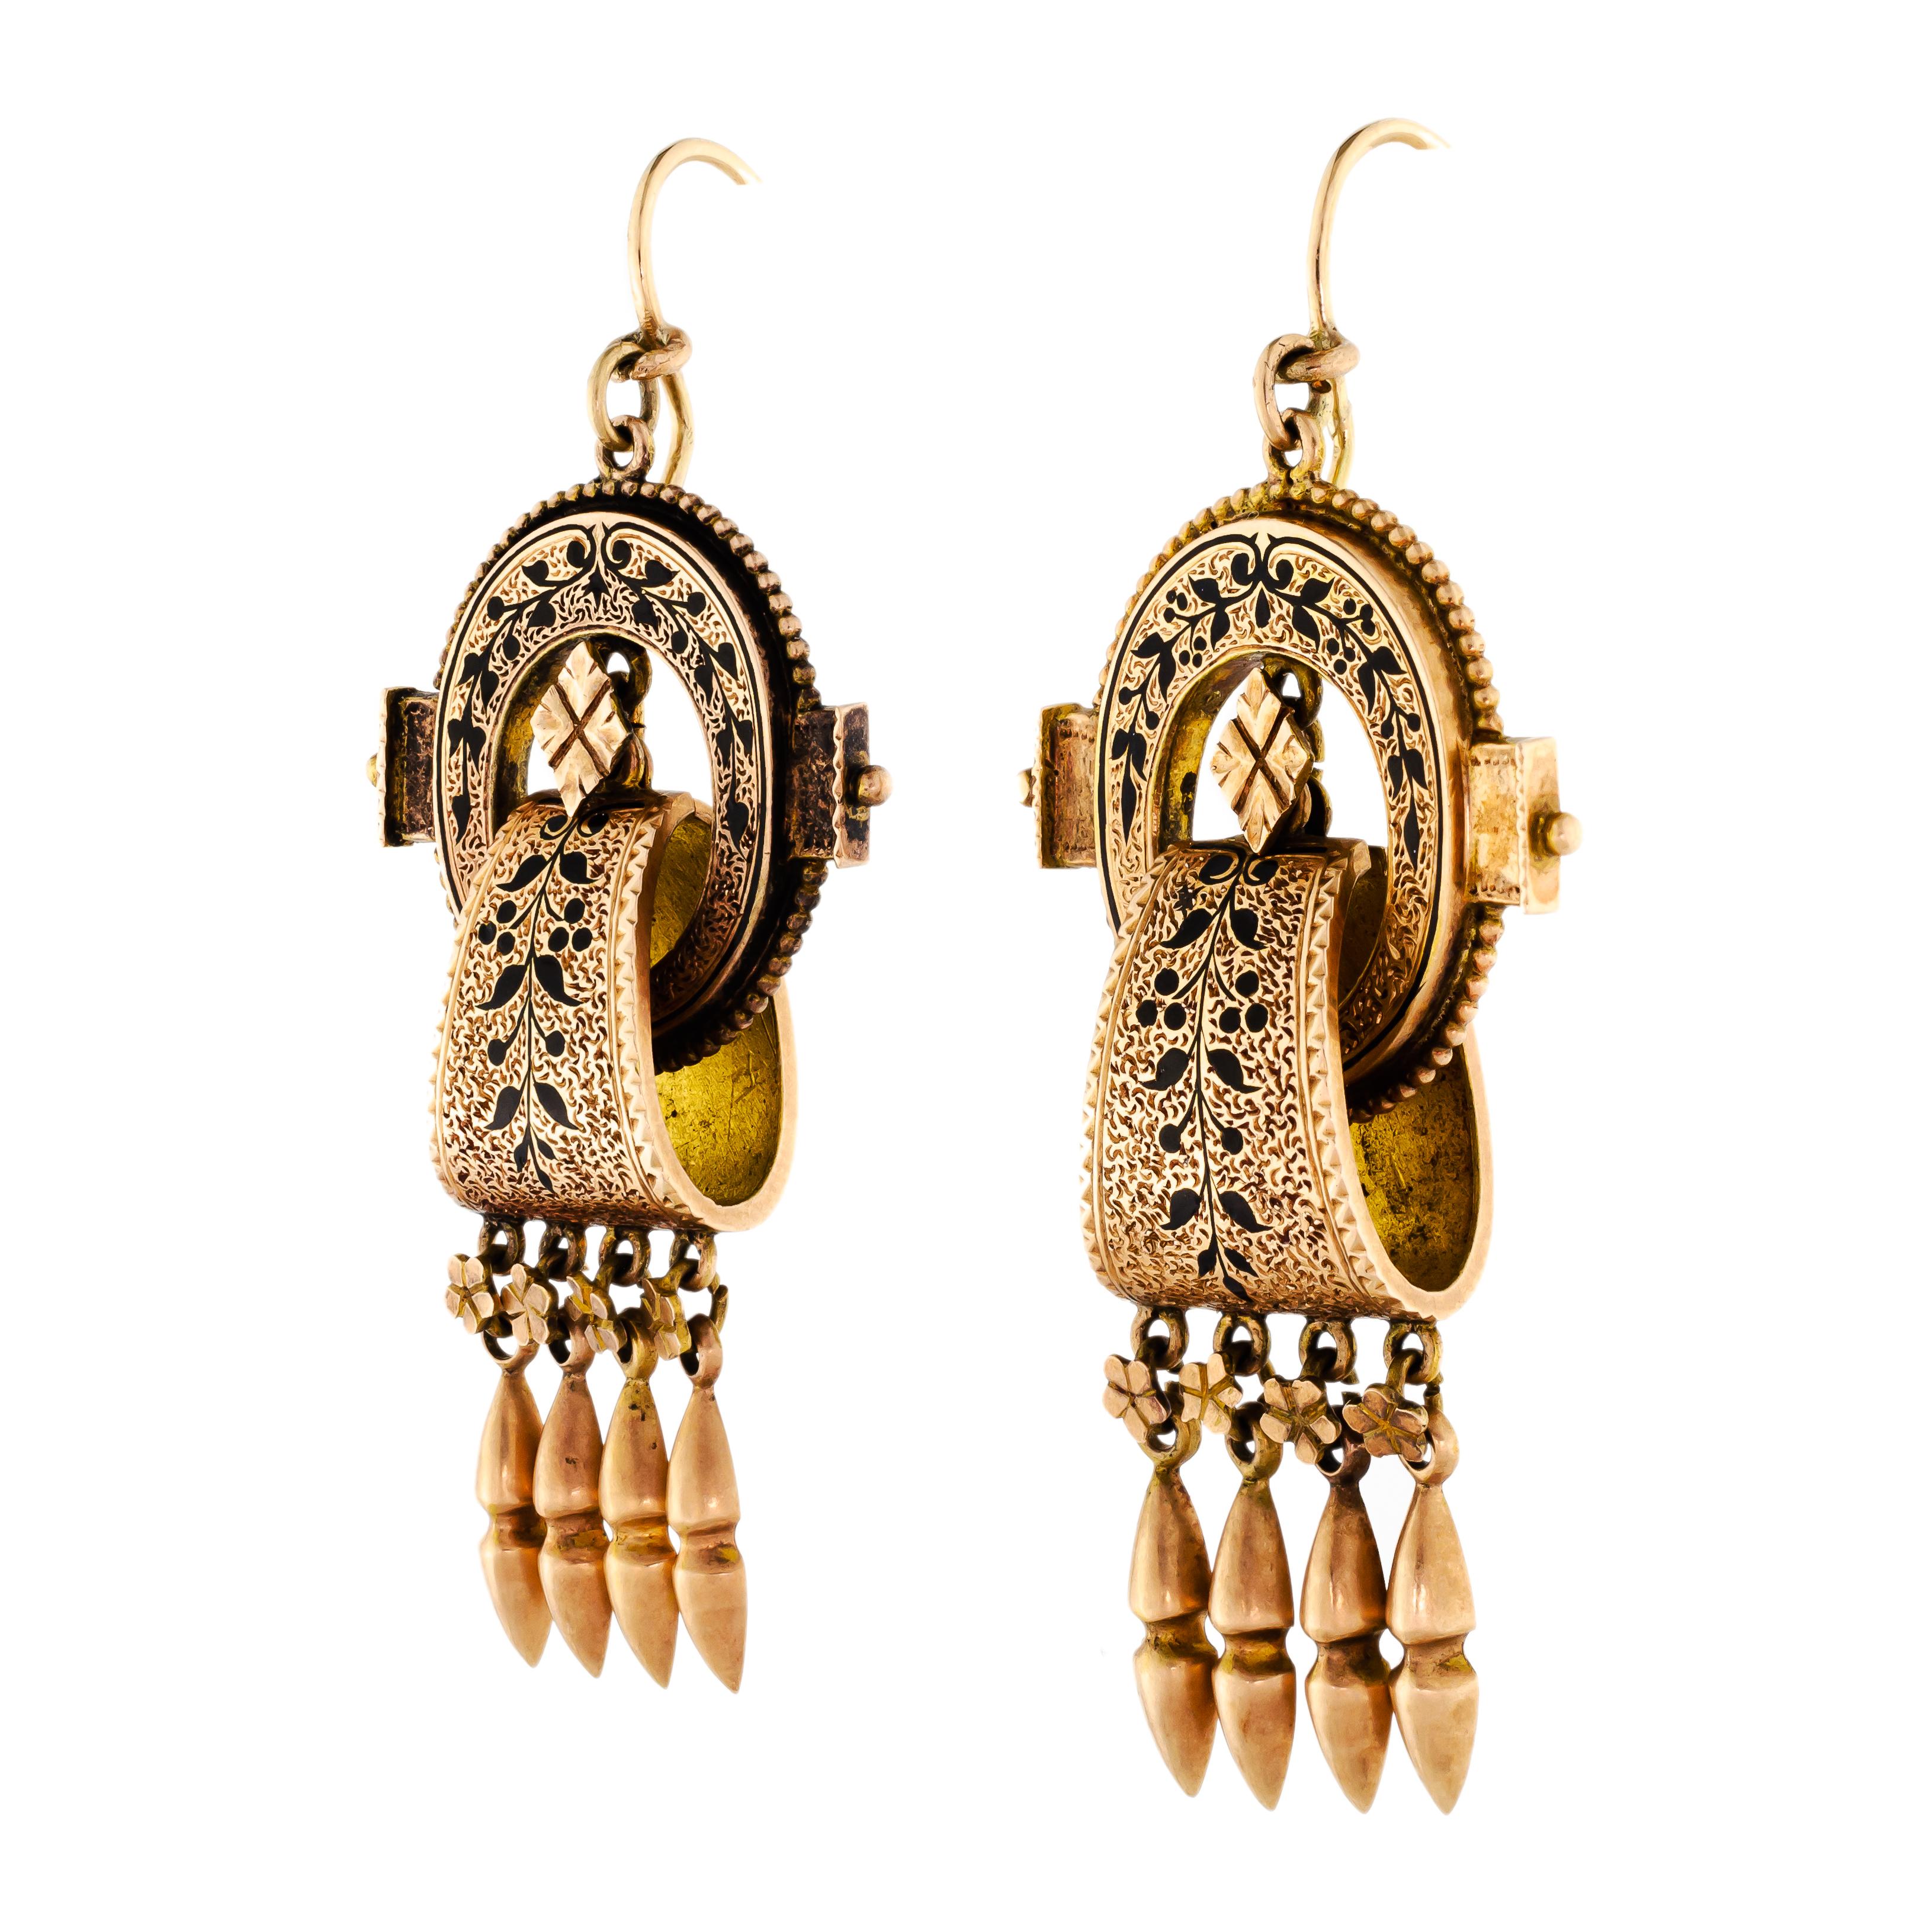 This outstanding pair of Victorian circa 1865 14kt yellow gold and black enamel tracery long pendant drop earrings of fine detail is simply fabulous. Three dimensional - floral engraved gold with applied gold details all embellished with black